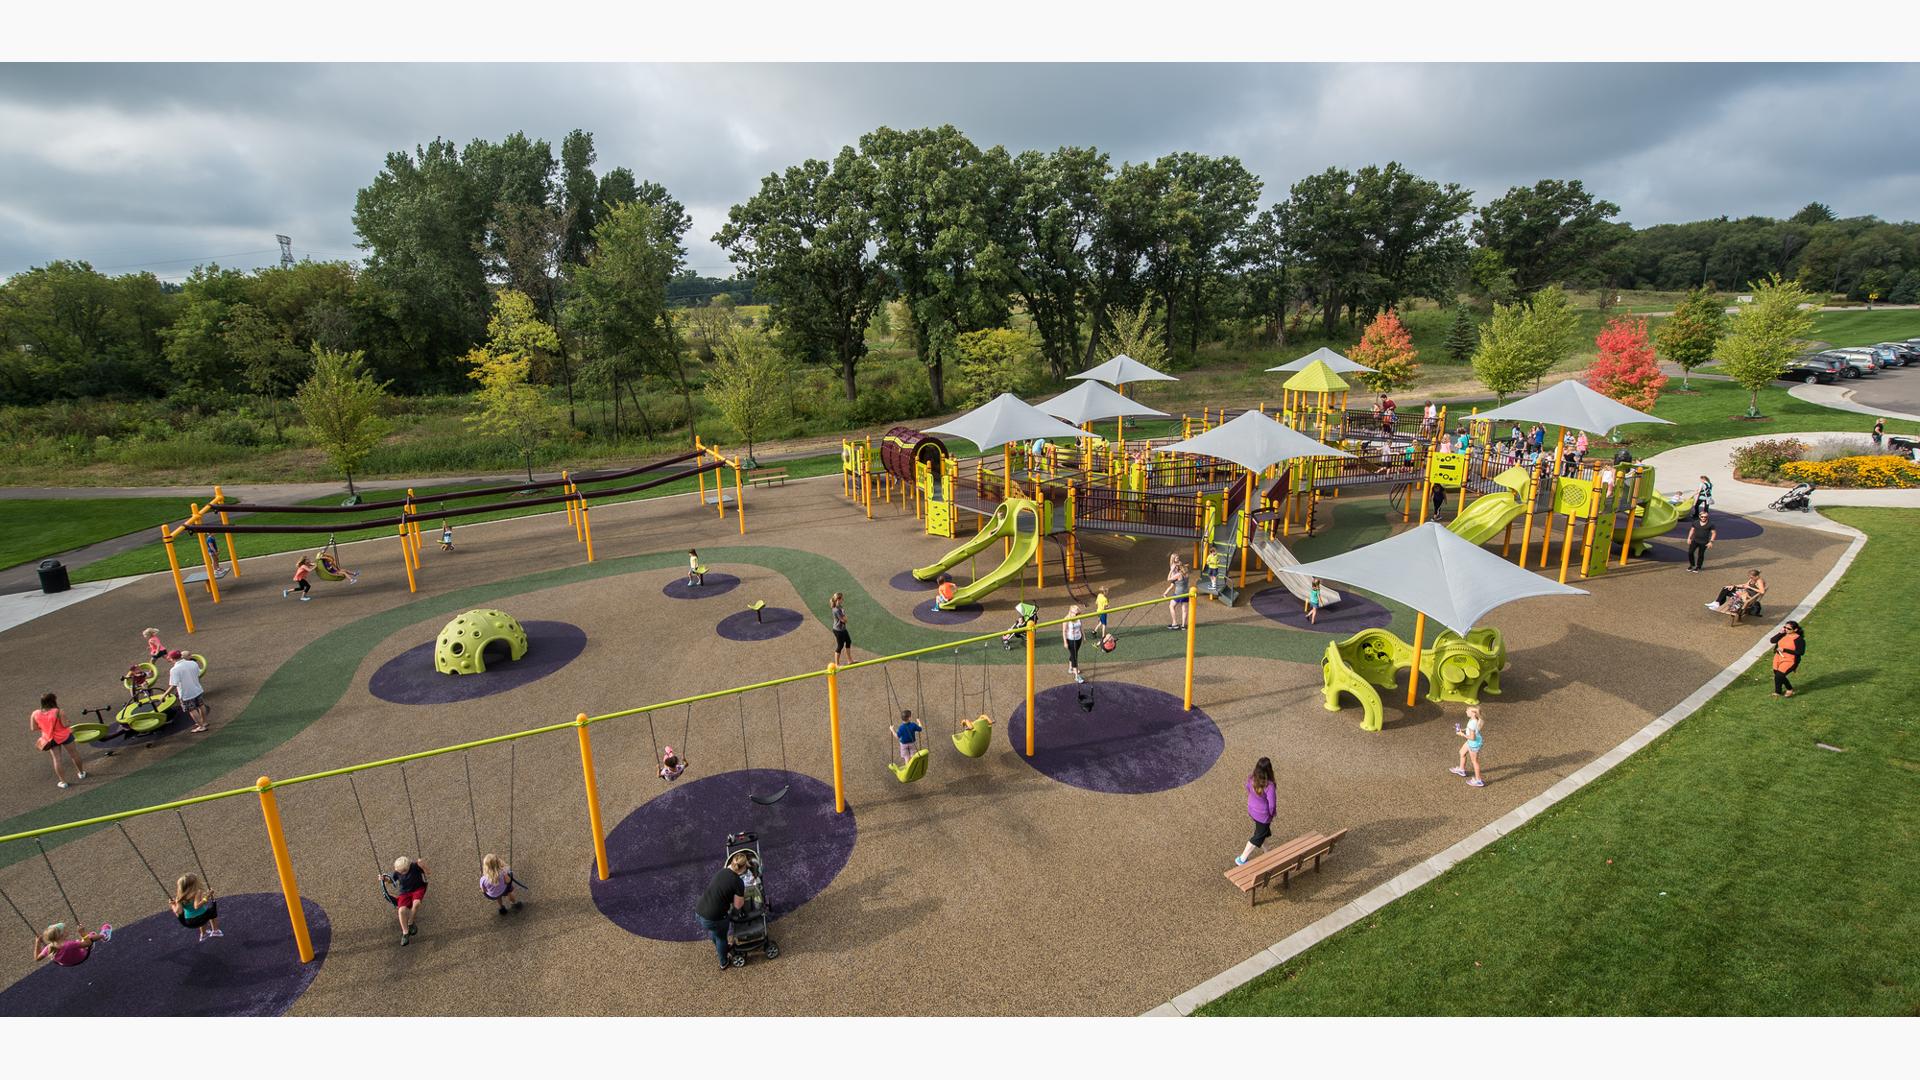 Landscape Structures - Commercial Playground Equipment